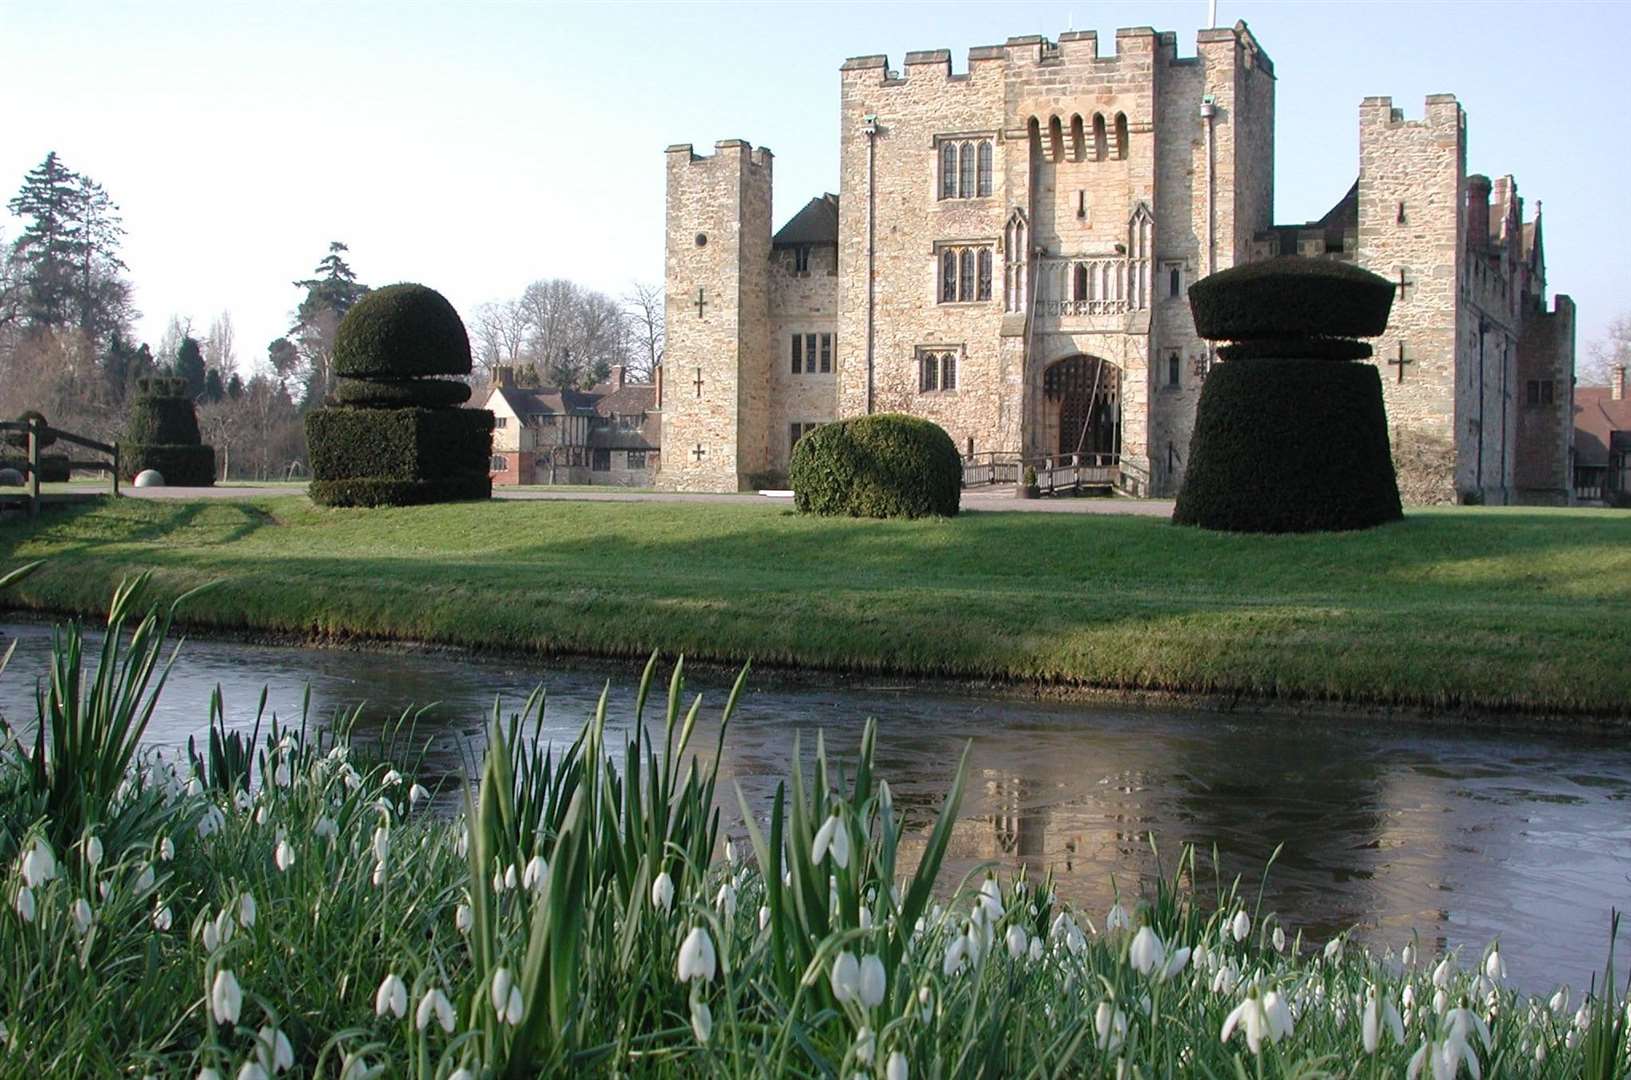 Follow the Snowdrop Walk around Hever Castle's historic grounds. Picture: Hever Castle and Gardens